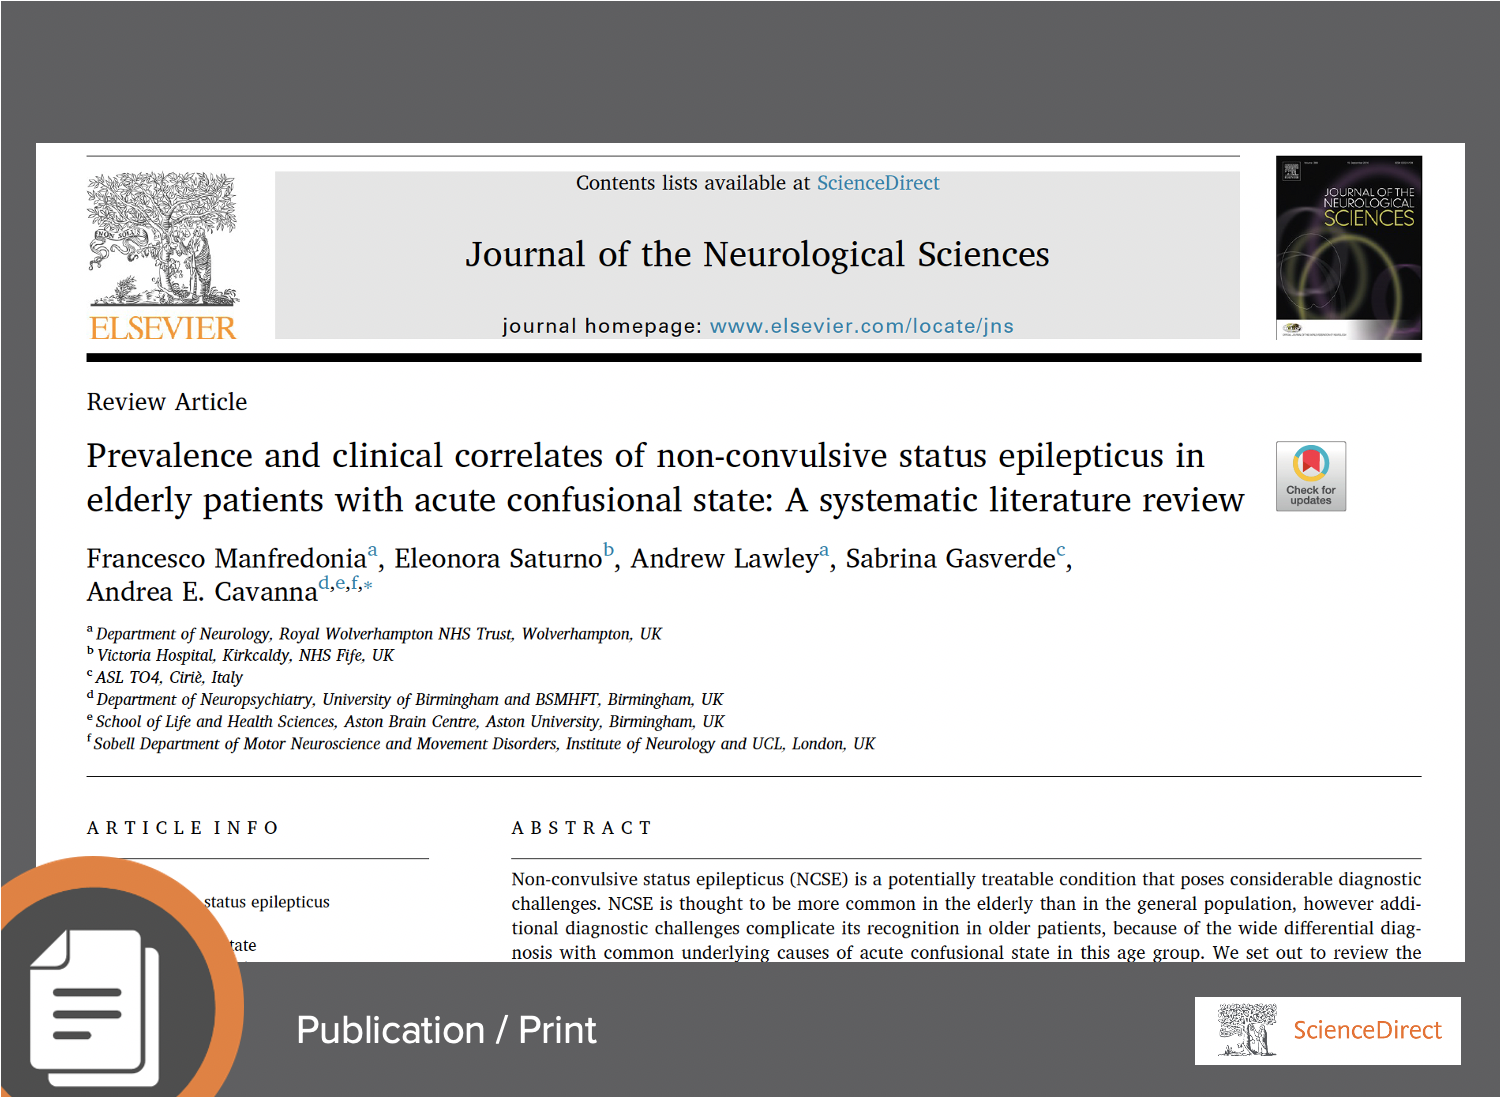 Prevalence and Clinical Correlates of Non-Convulsive Status Epilepticus in Elderly Patients with Acute Confusional State: A Systematic Literature Review